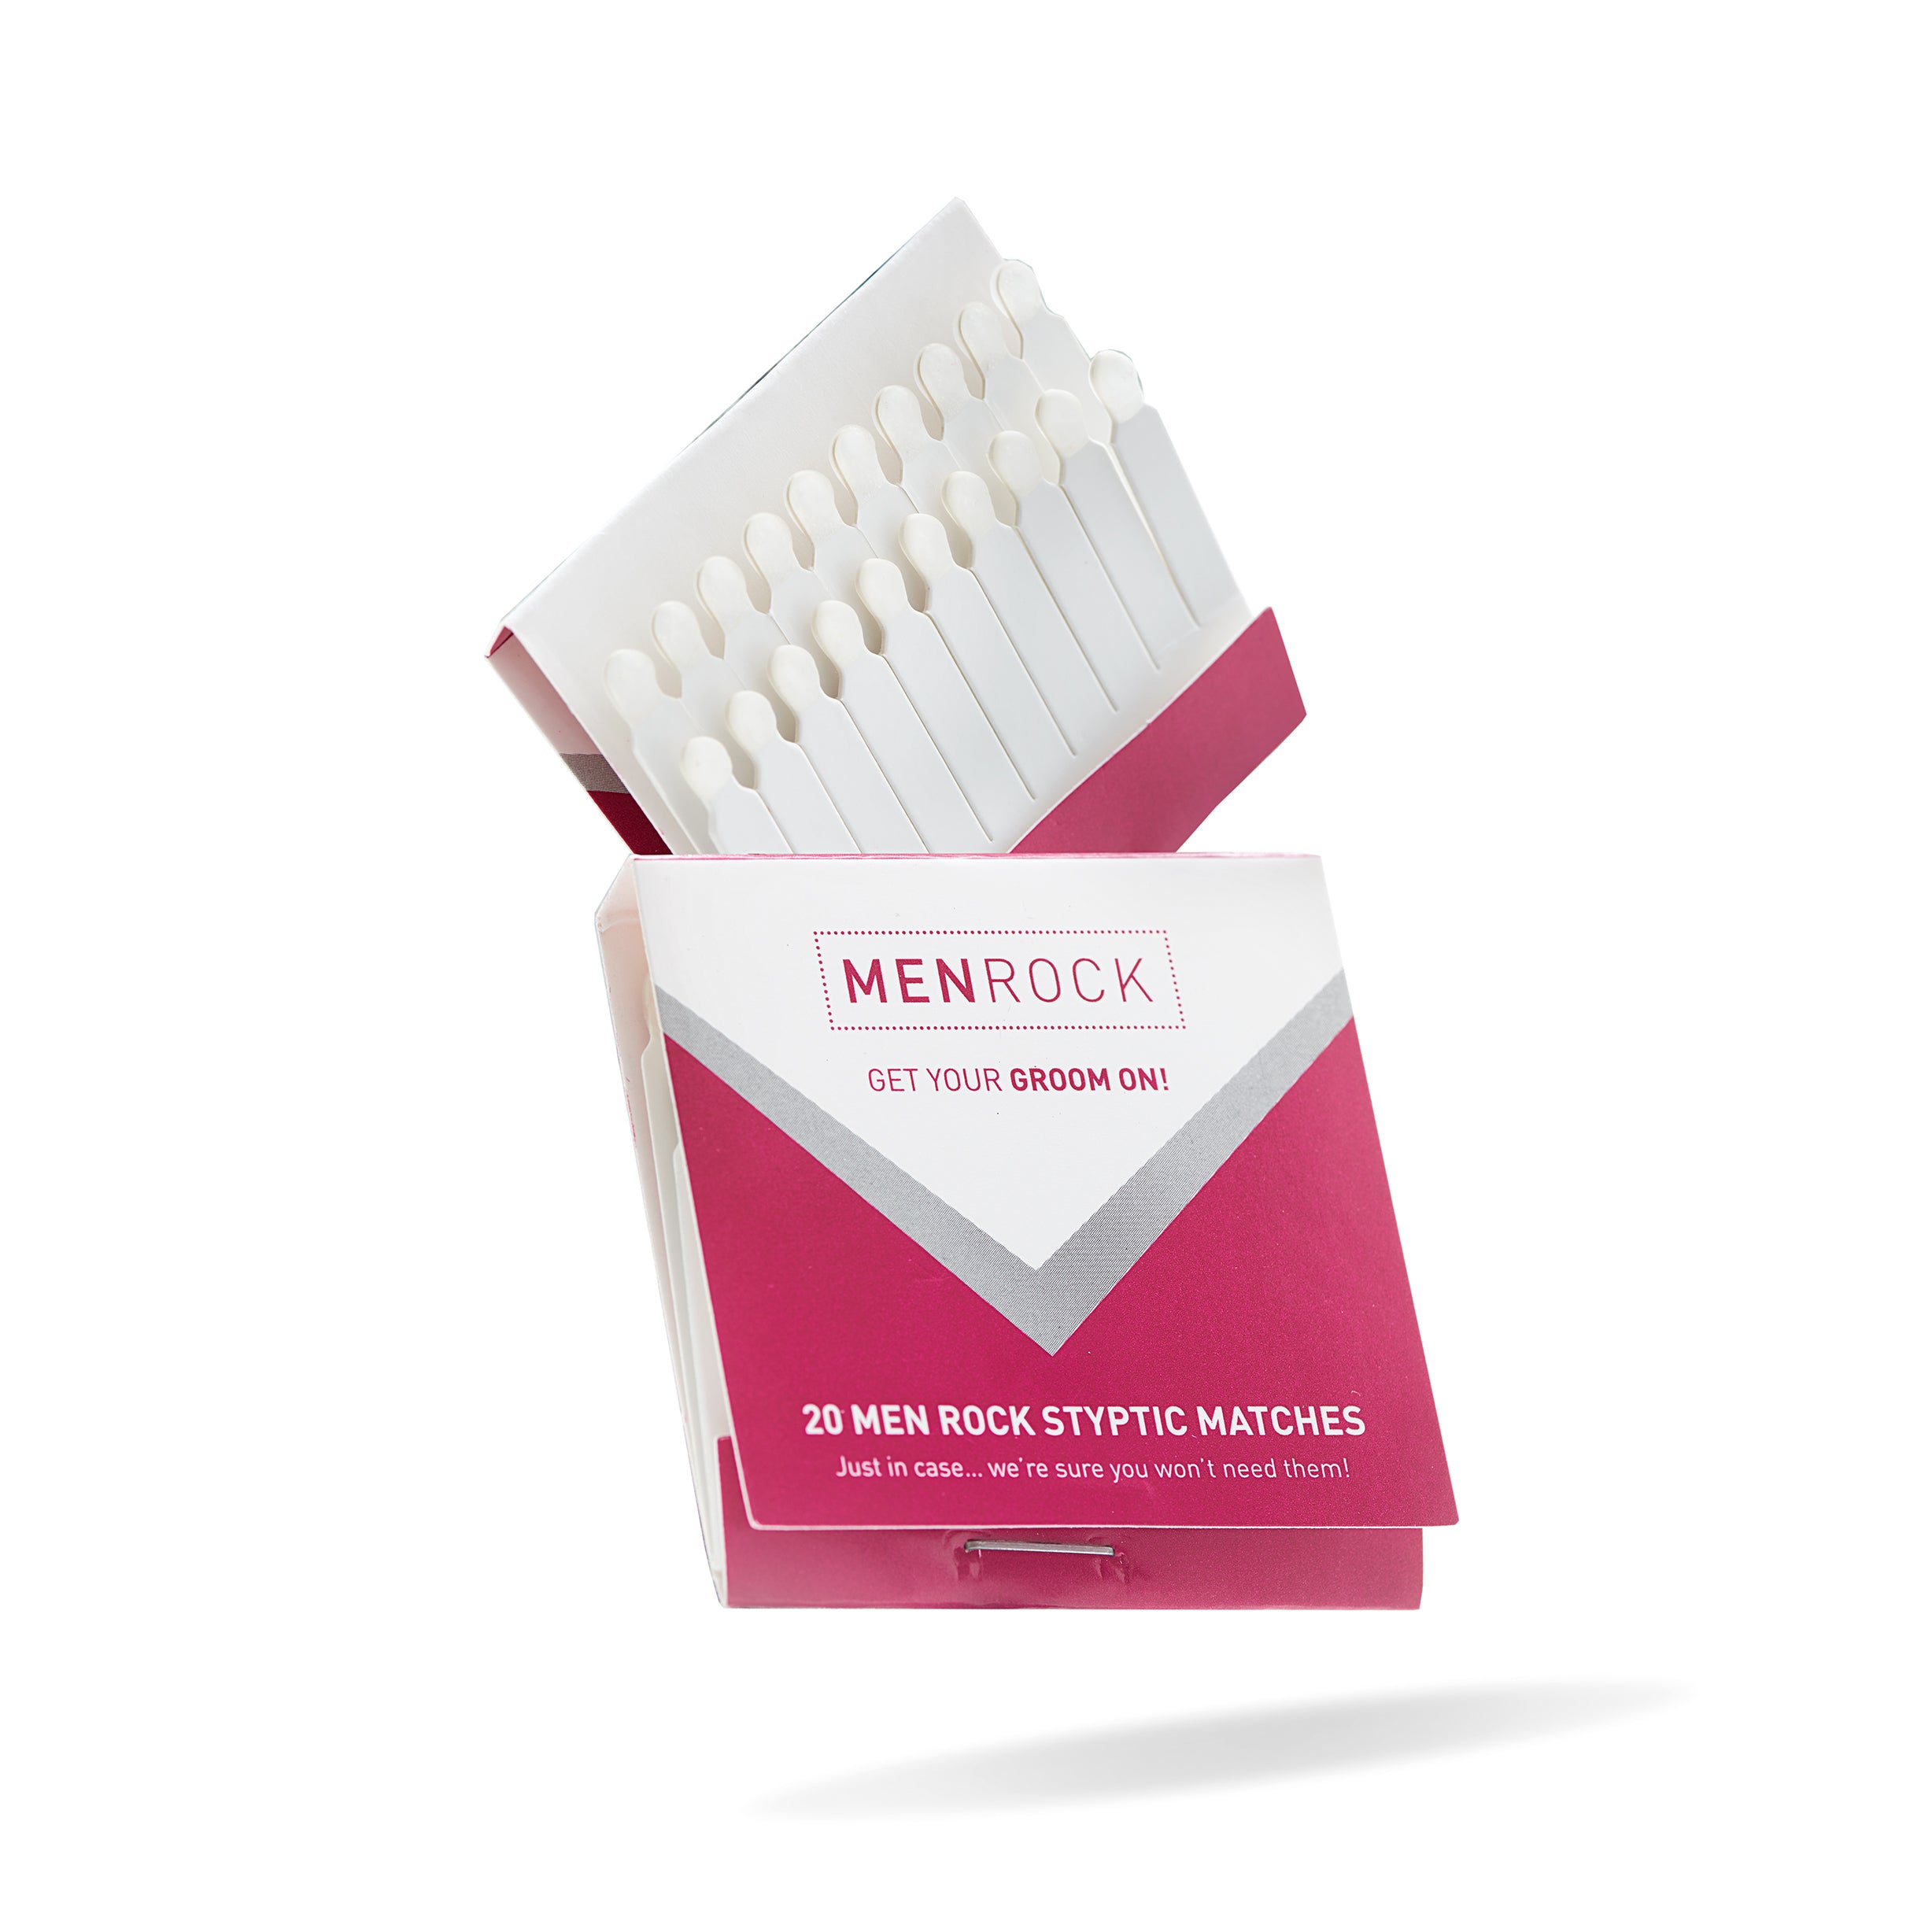 Men Rock styptic matches are perfect solution if you cut yourself when shaving 